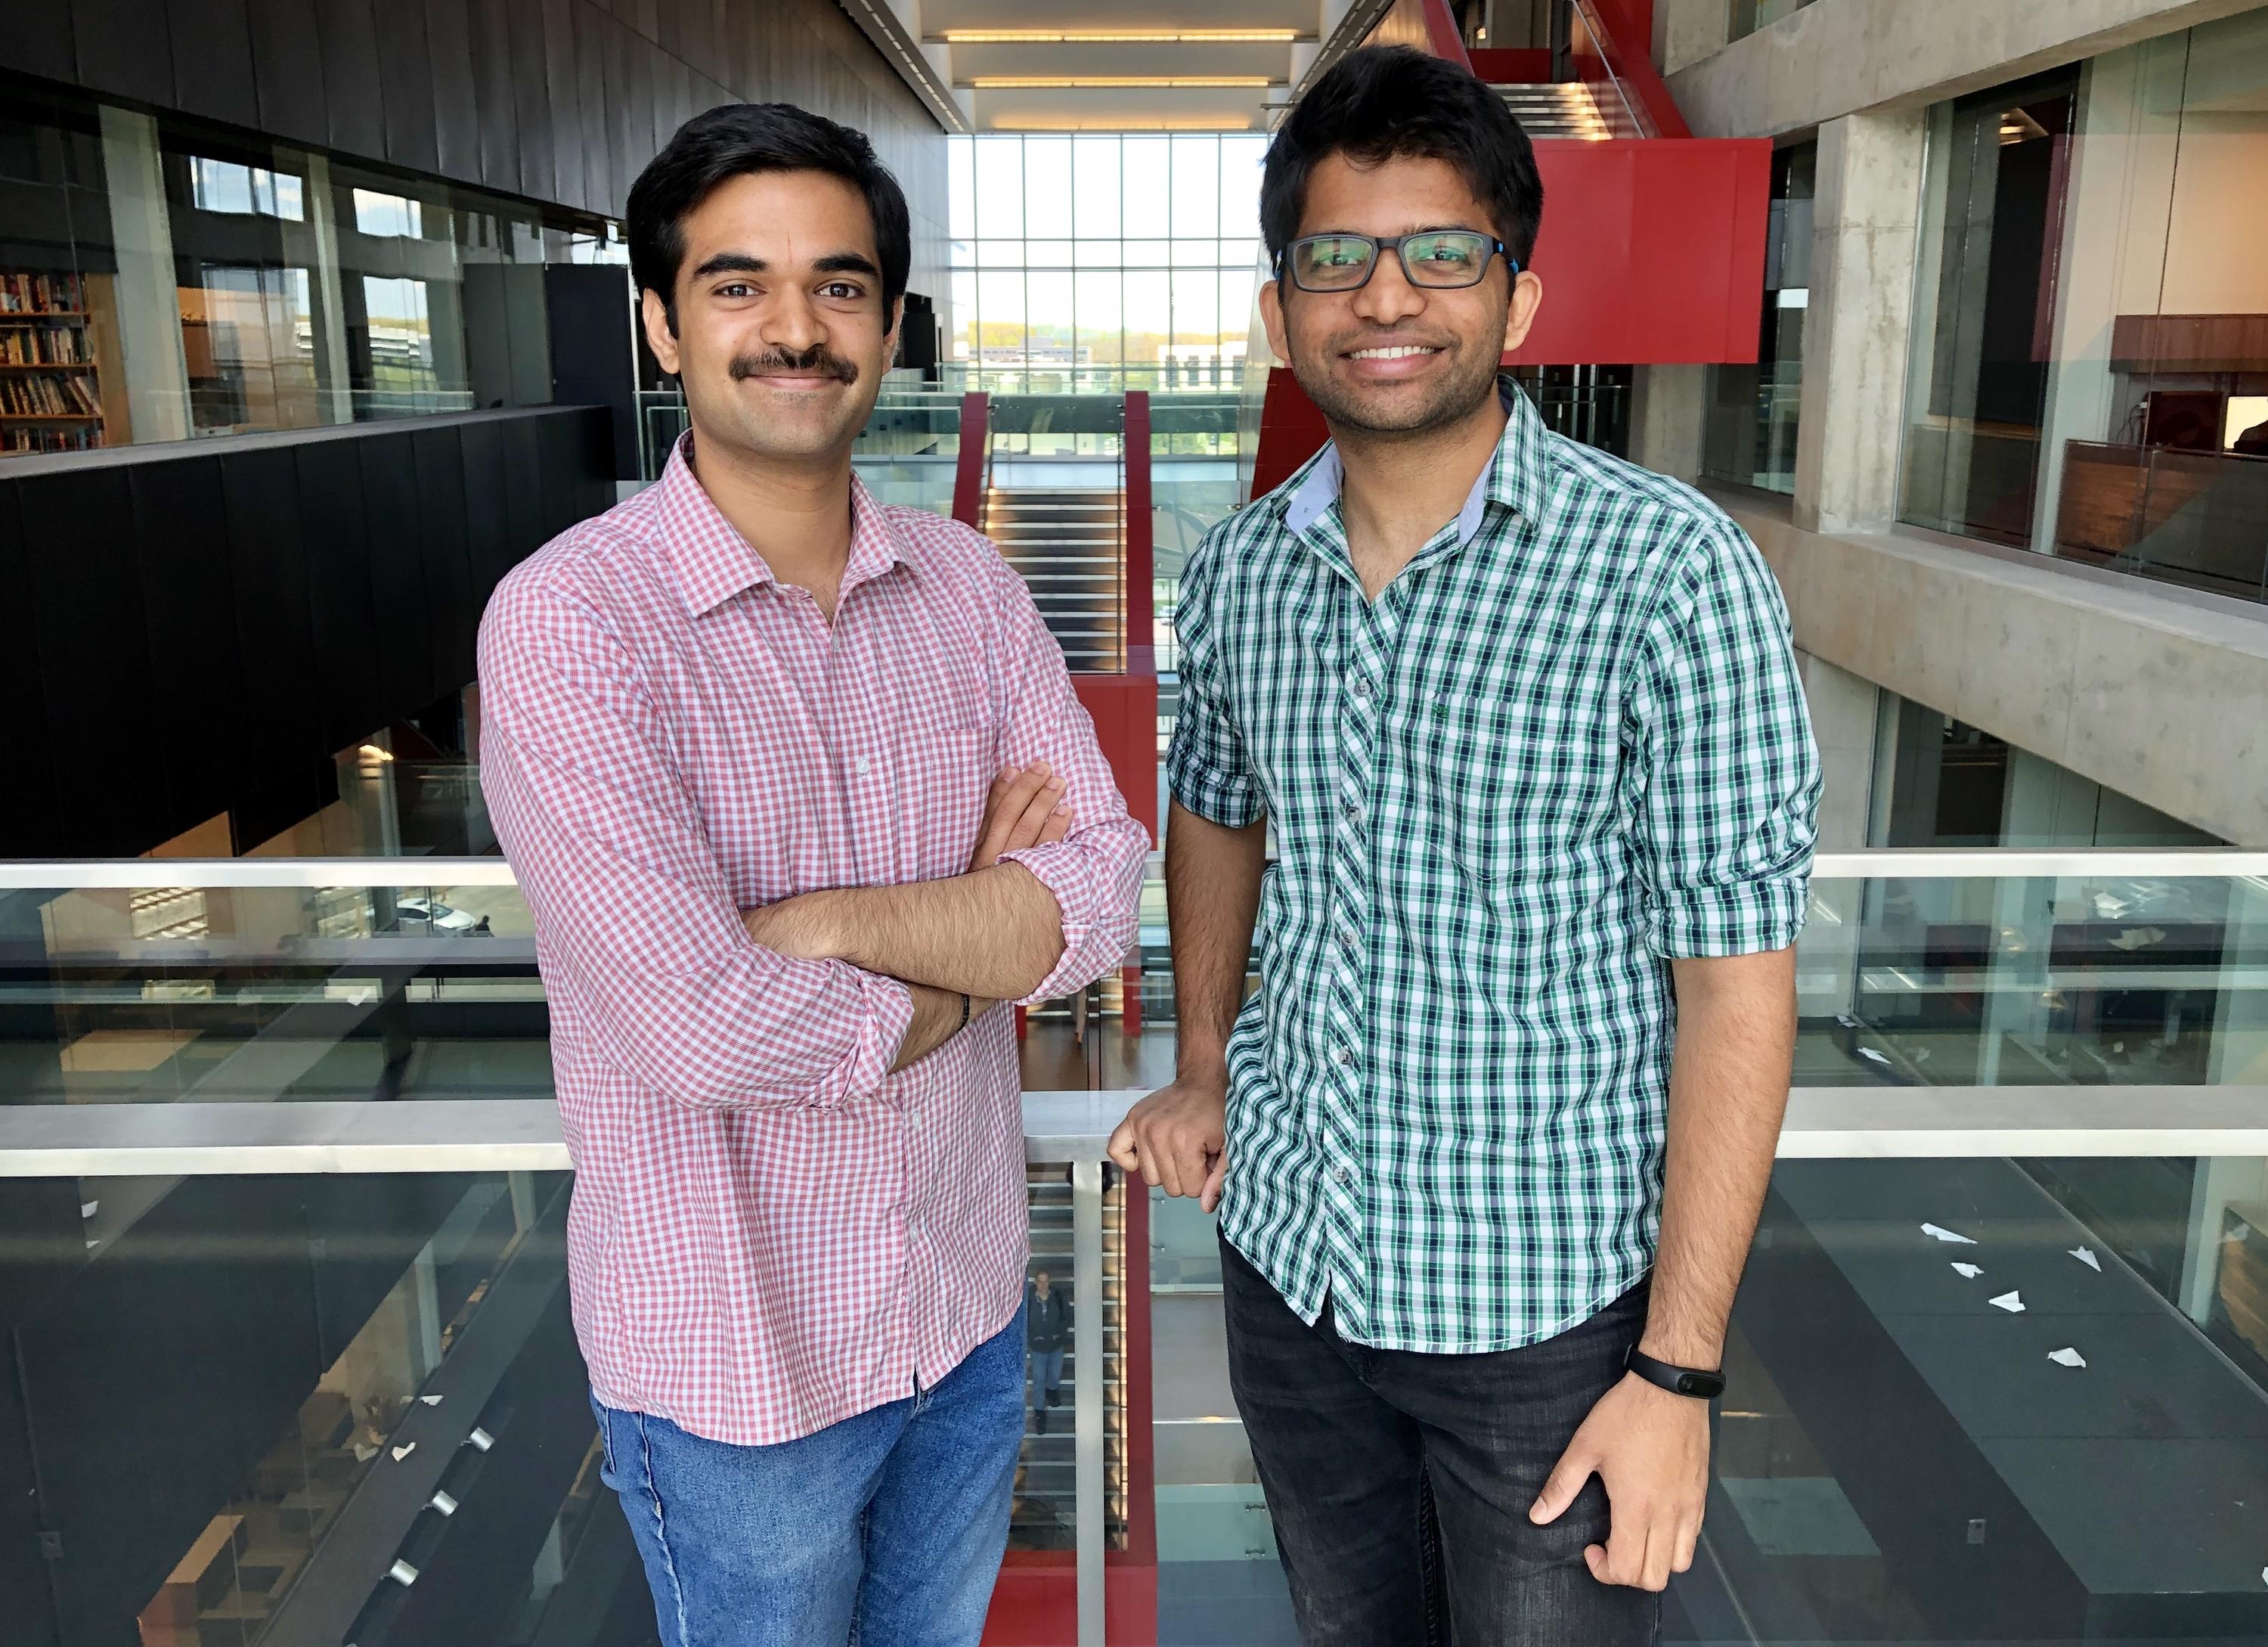 Engineering graduate students Aravind Ravi, left, and Harshwin Venugopal developed an AI system to automatically find and save highlights in videos of cricket matches.